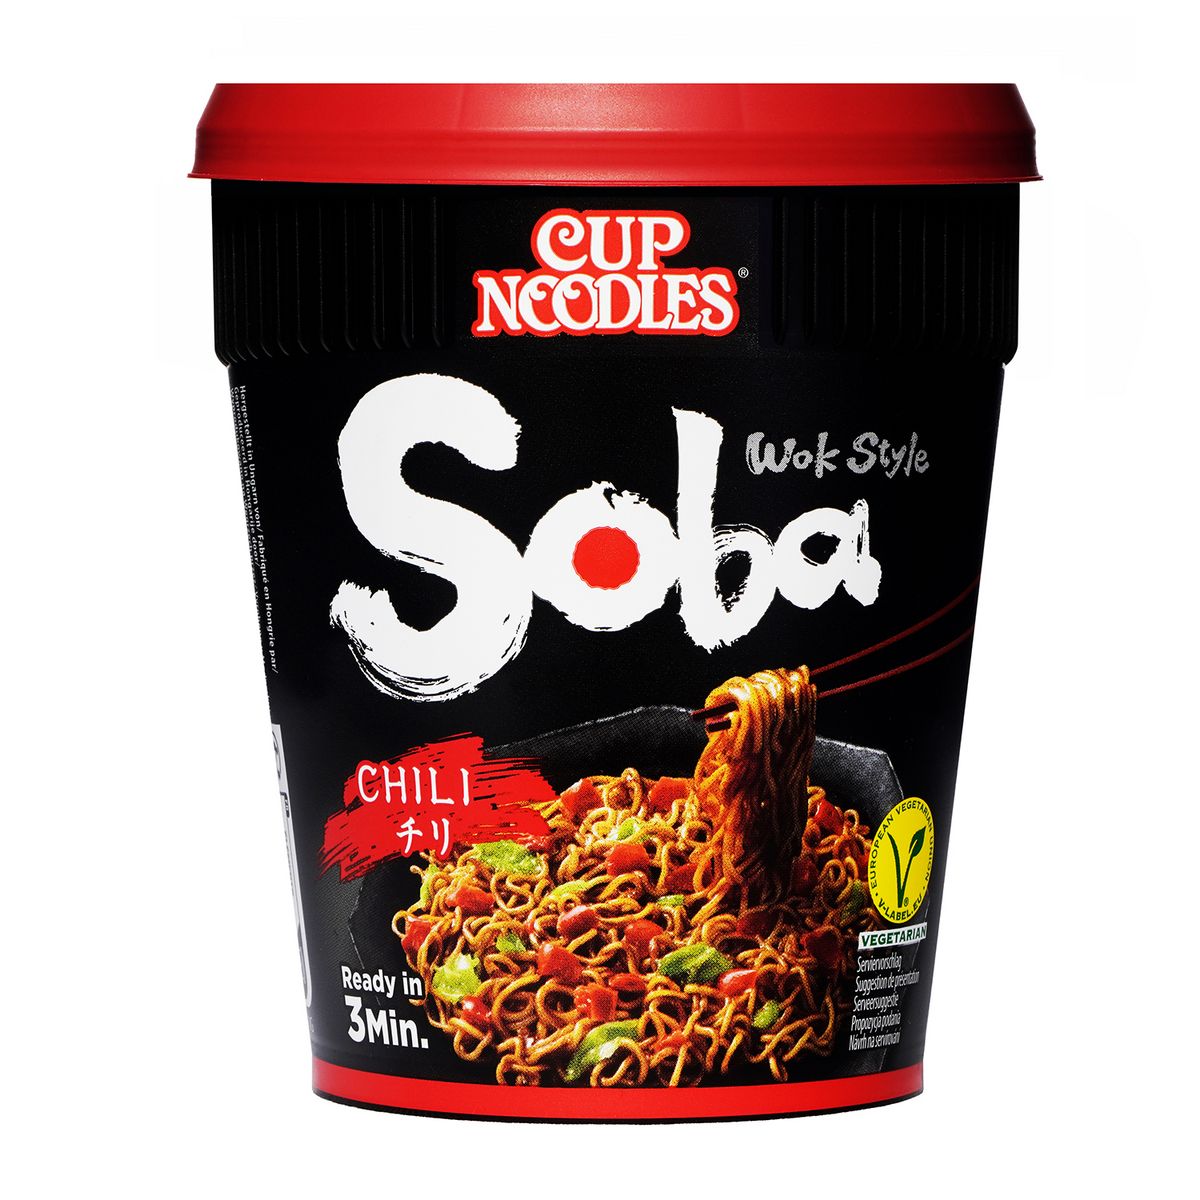 NISSIN Cup nouilles soba chili 1 personne 92g